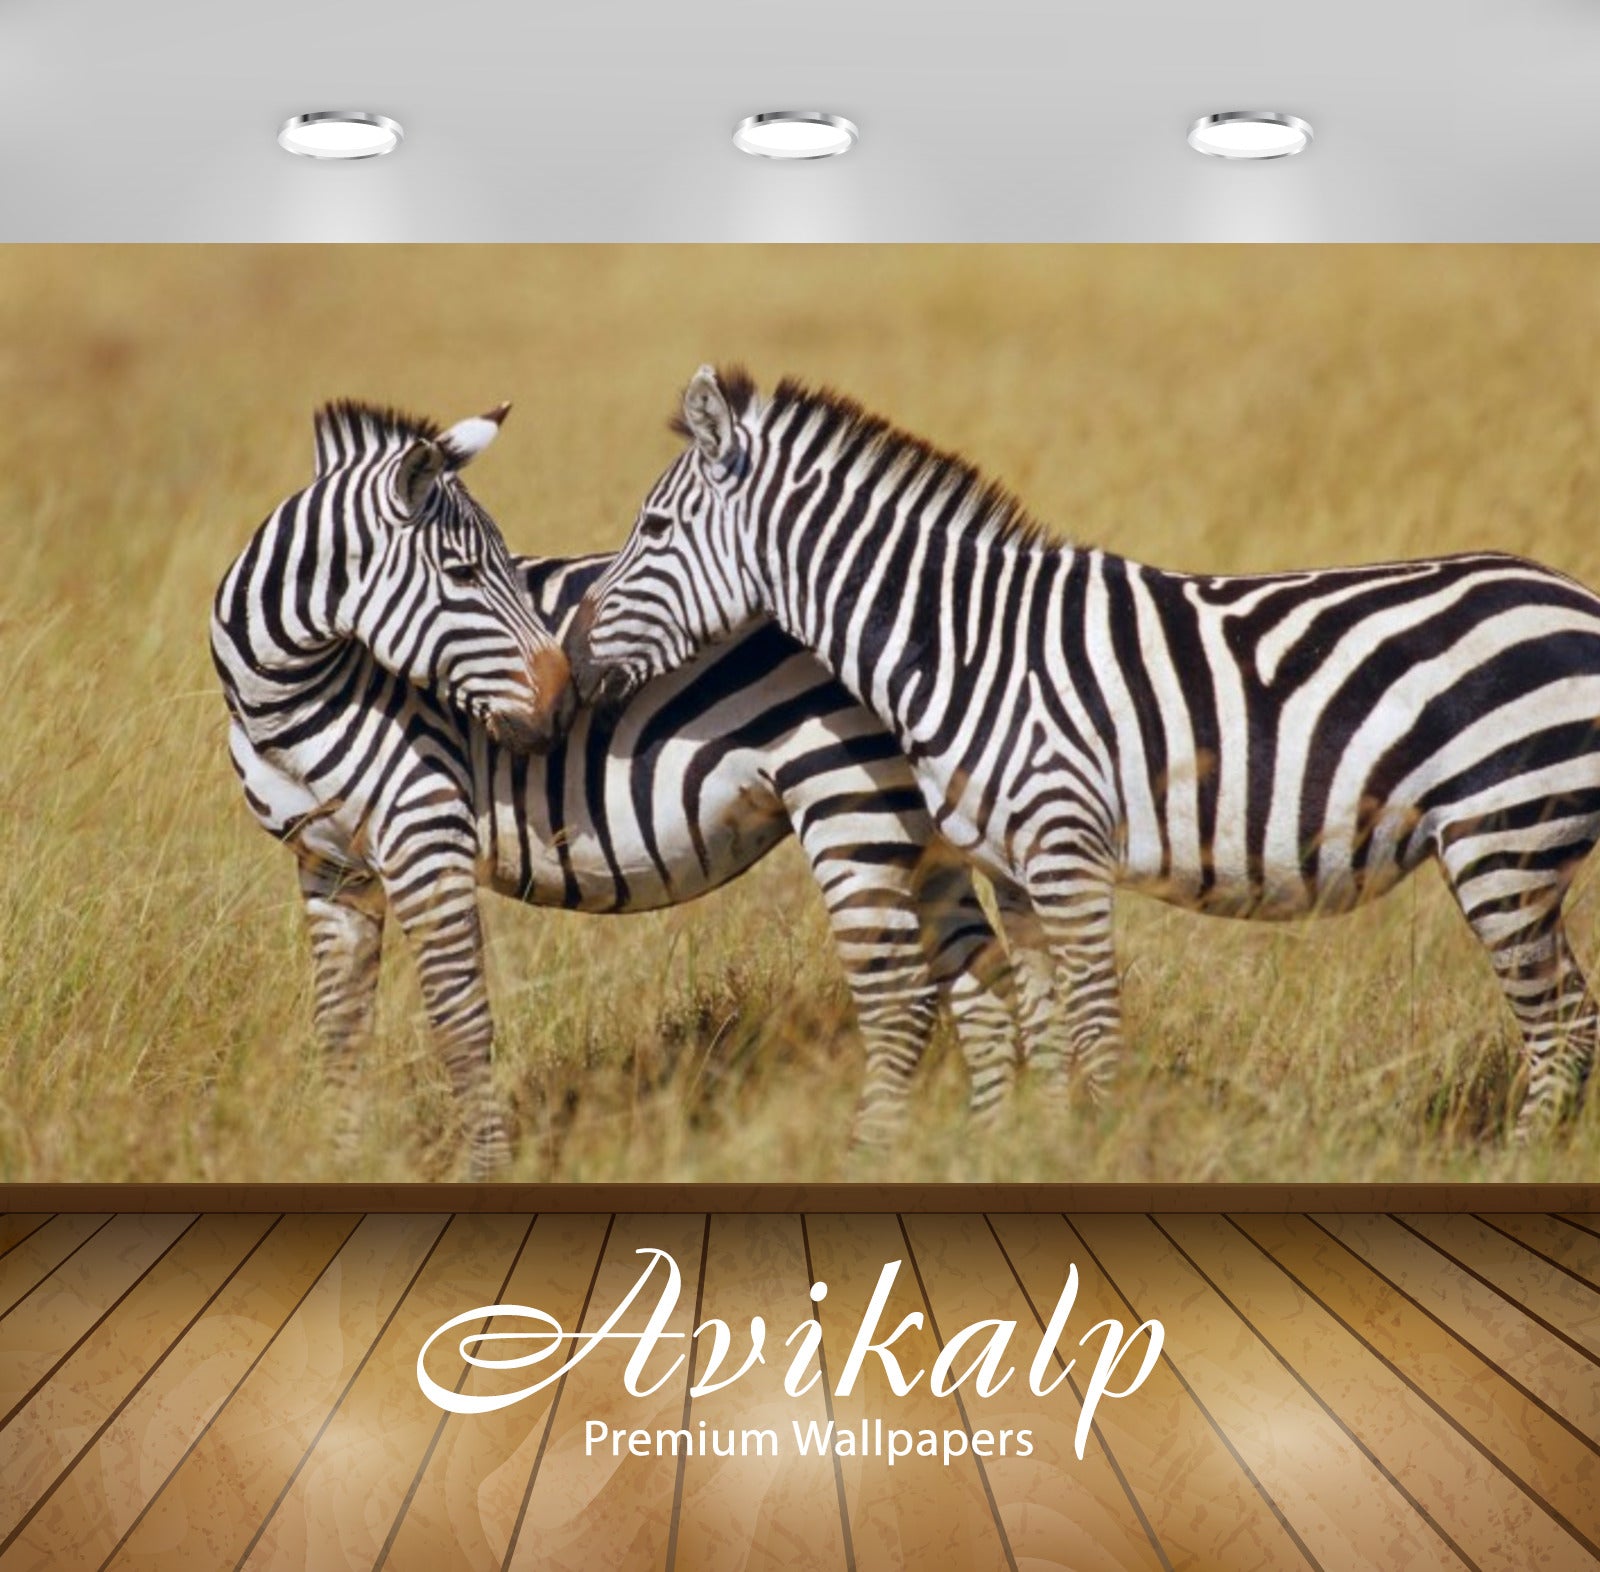 Avikalp Exclusive Awi2371 Animals Couple Zebras Full HD Wallpapers for Living room, Hall, Kids Room,